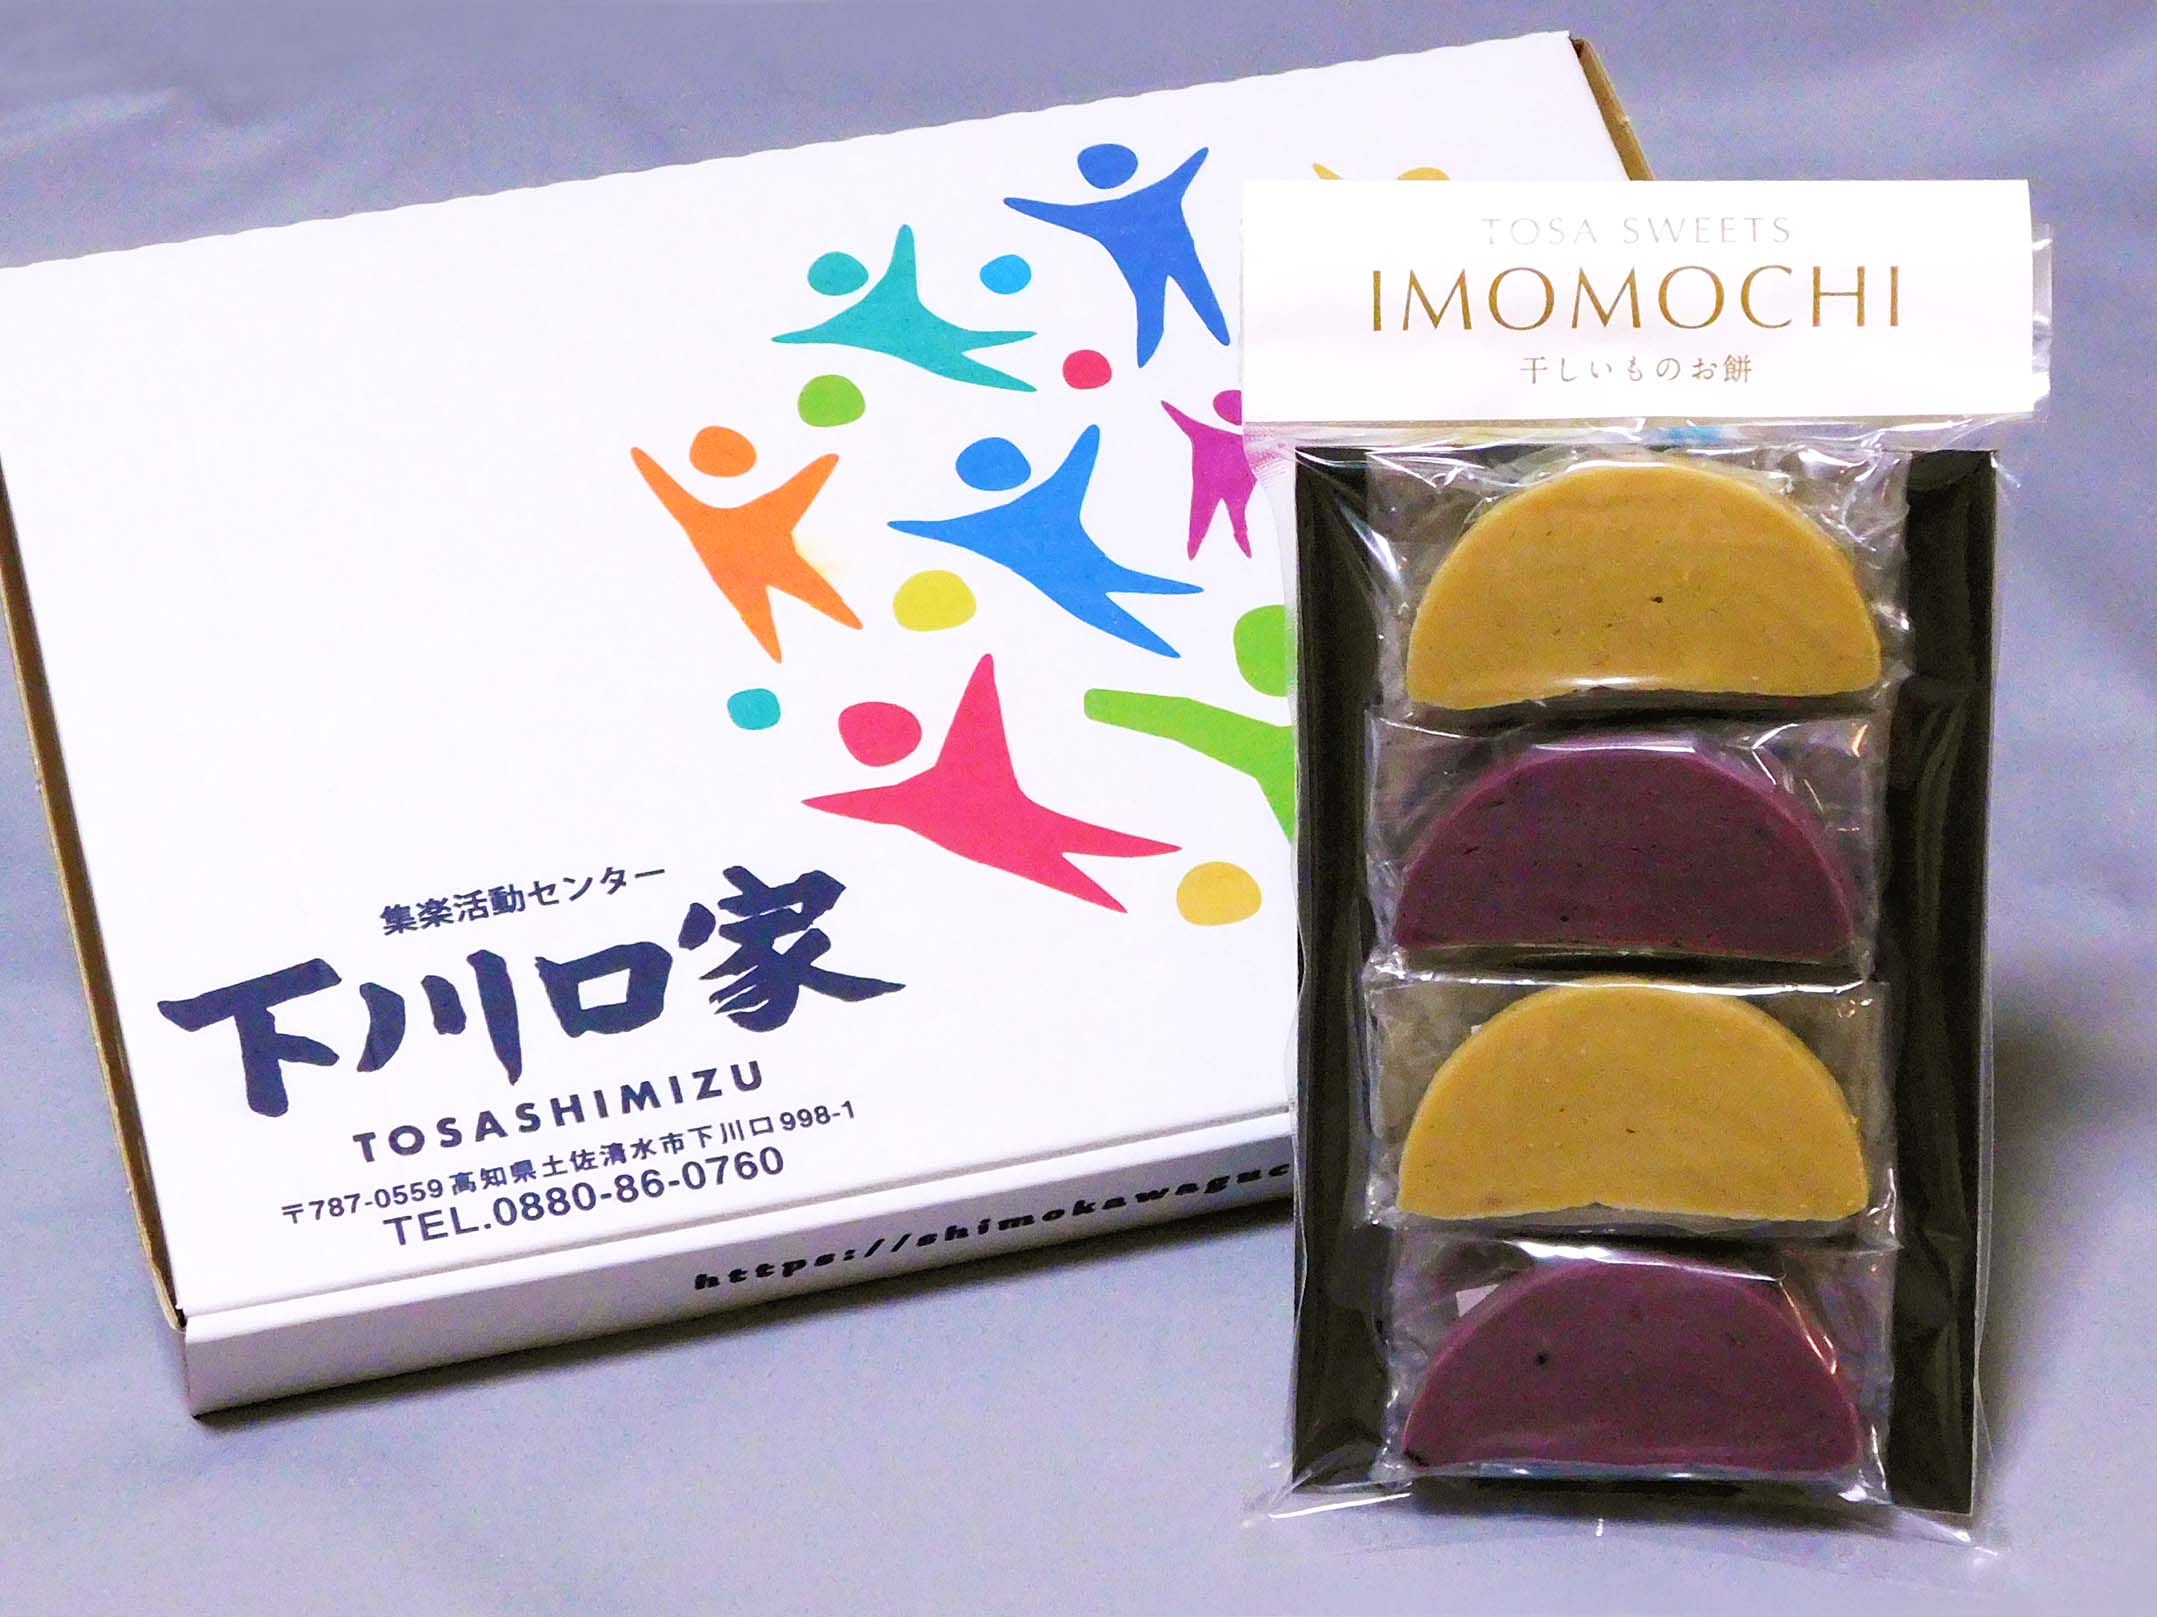 TOSA SWEETS IMOMOCHI